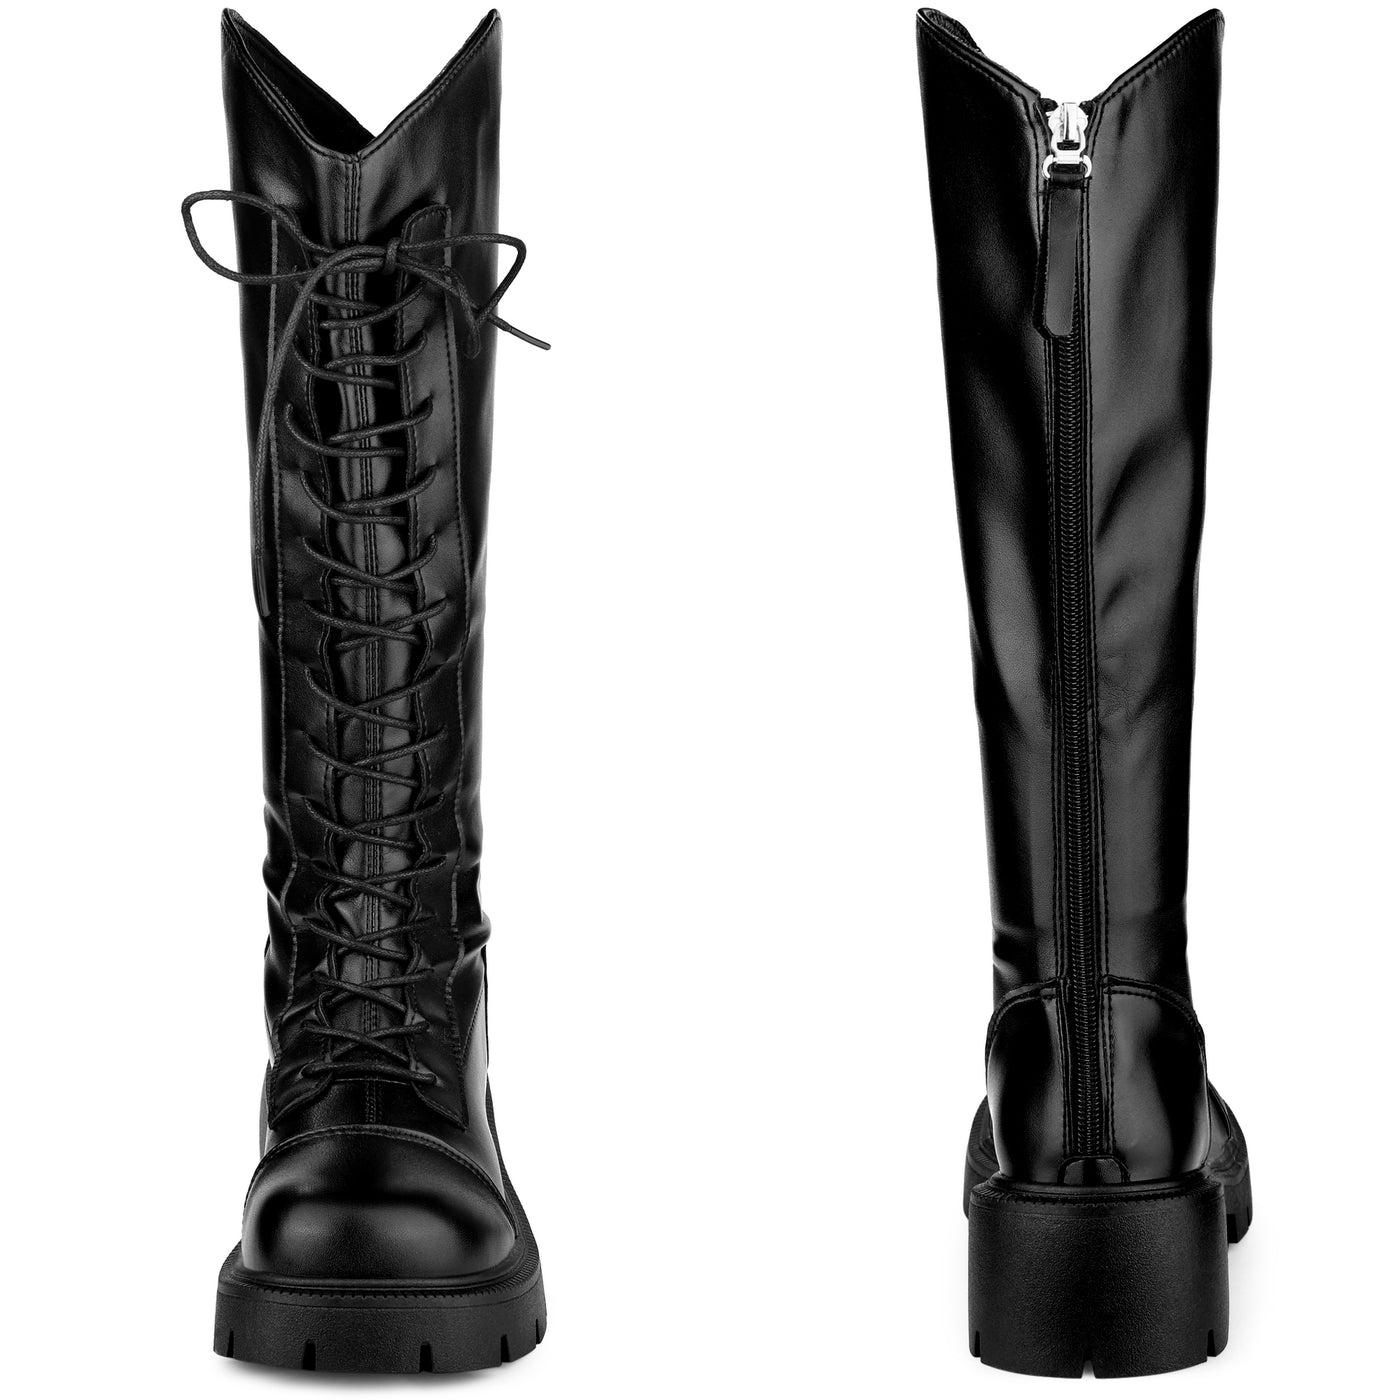 Bublédon Perphy Lace Up Round Toe Chunky Heel Knee High Boots for Women